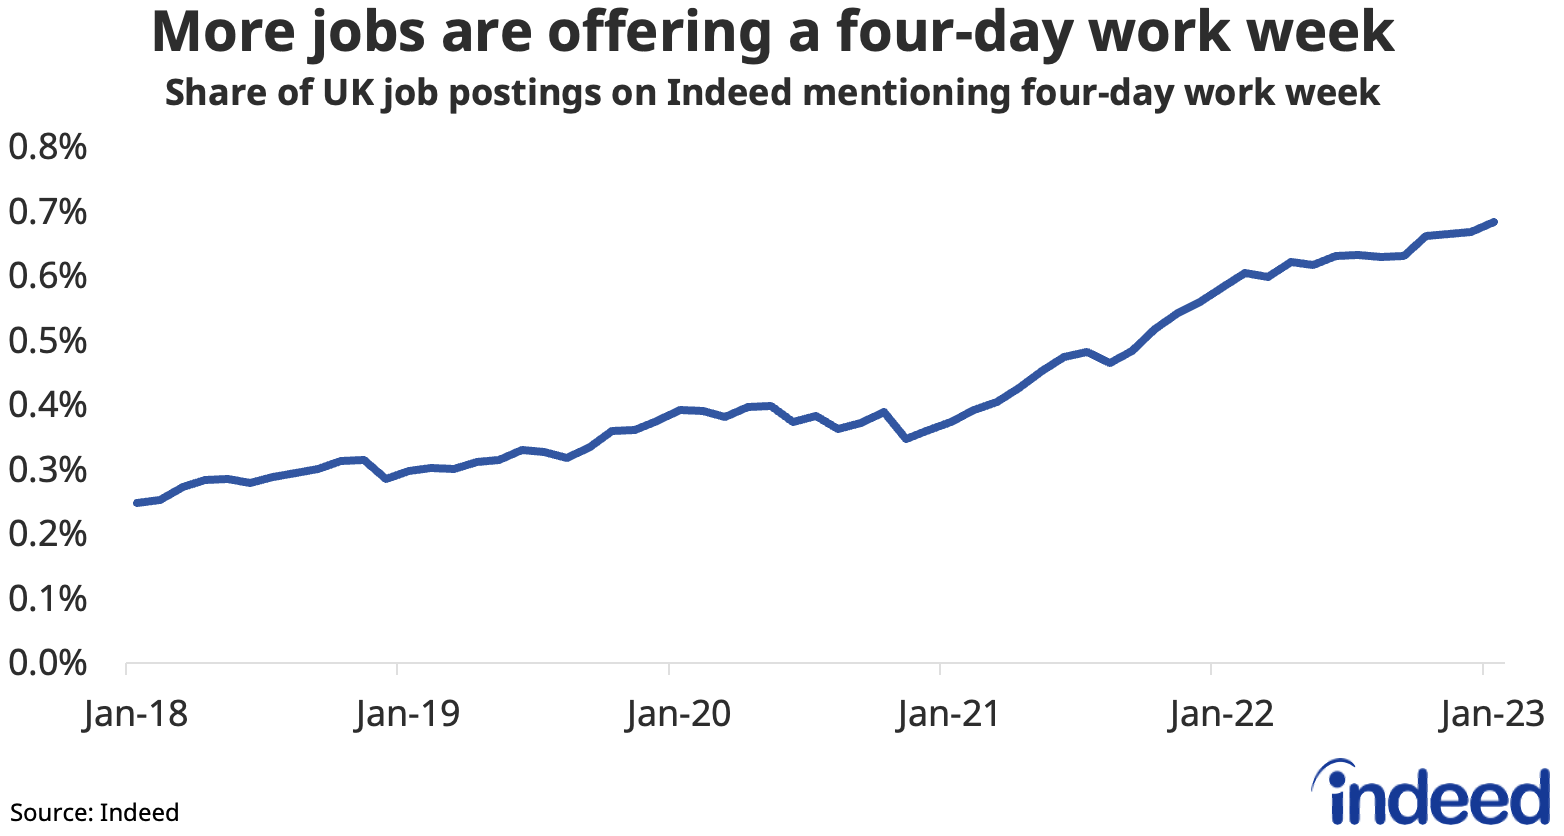 Line graph titled “More jobs are offering a four-day work week” showing the share of UK job postings on Indeed offering four-day work weeks. The share of postings has risen from 0.2% in January 2018 to 0.7% in January 2023. 